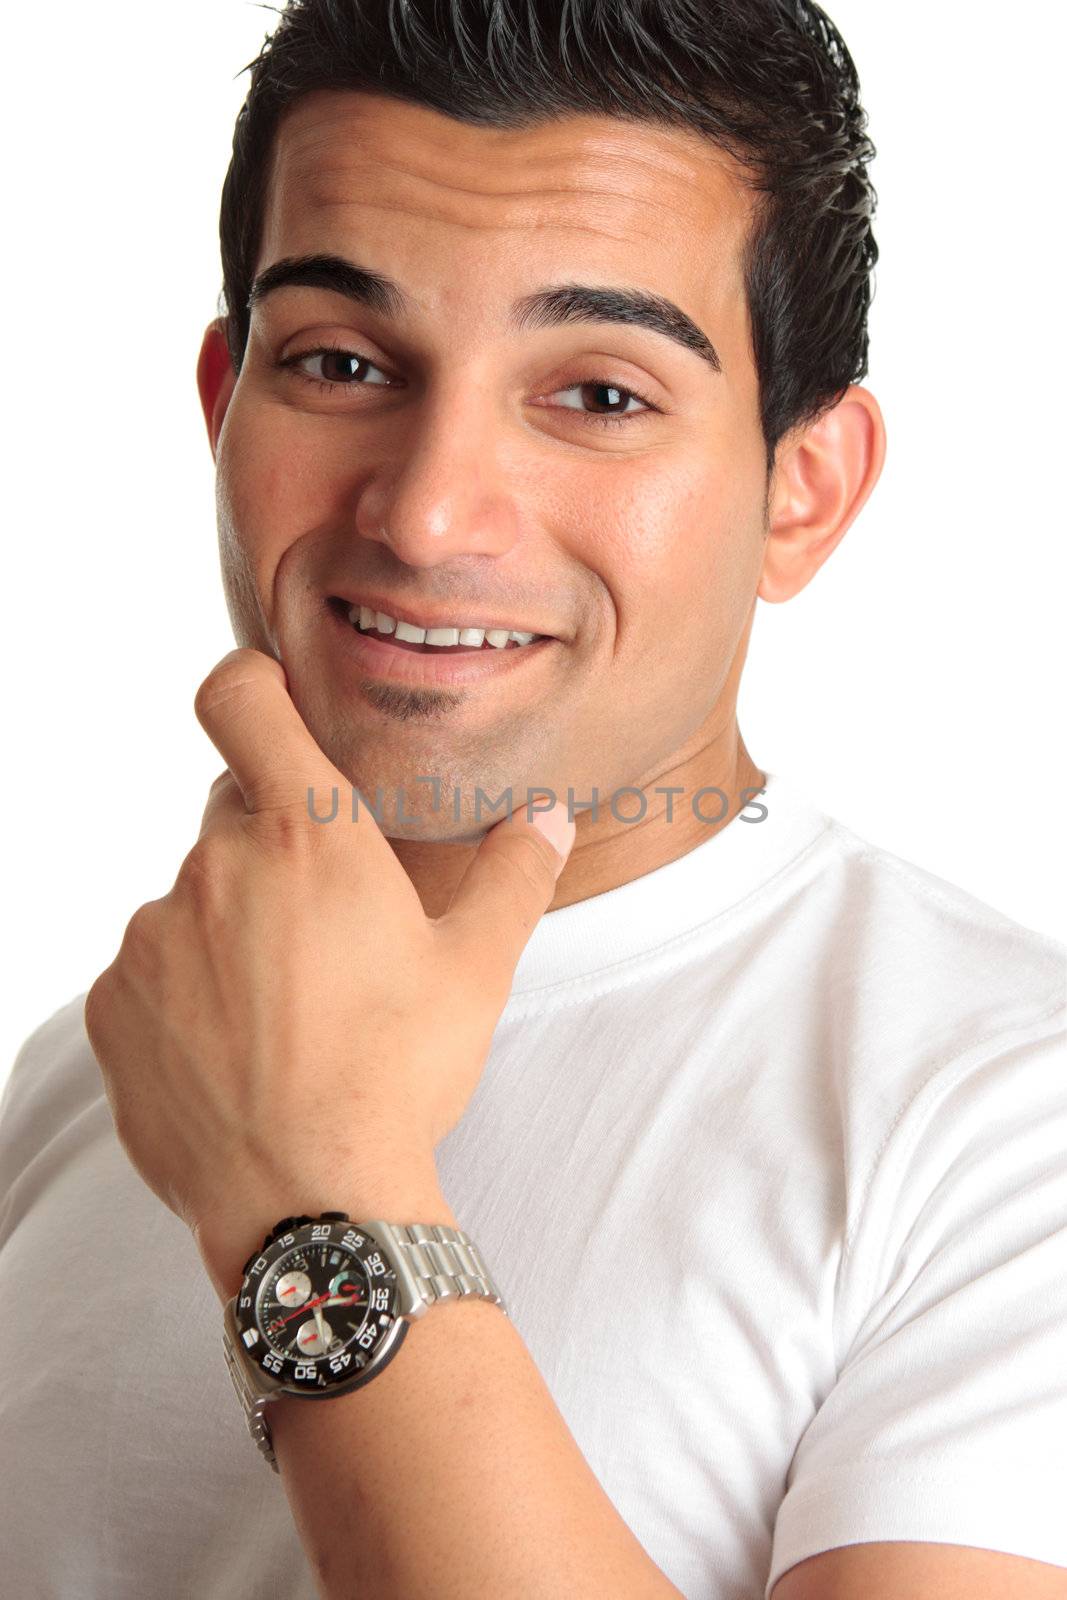 Happy laughing smiling casually dressed man wearing a chronograph watch.  White background.